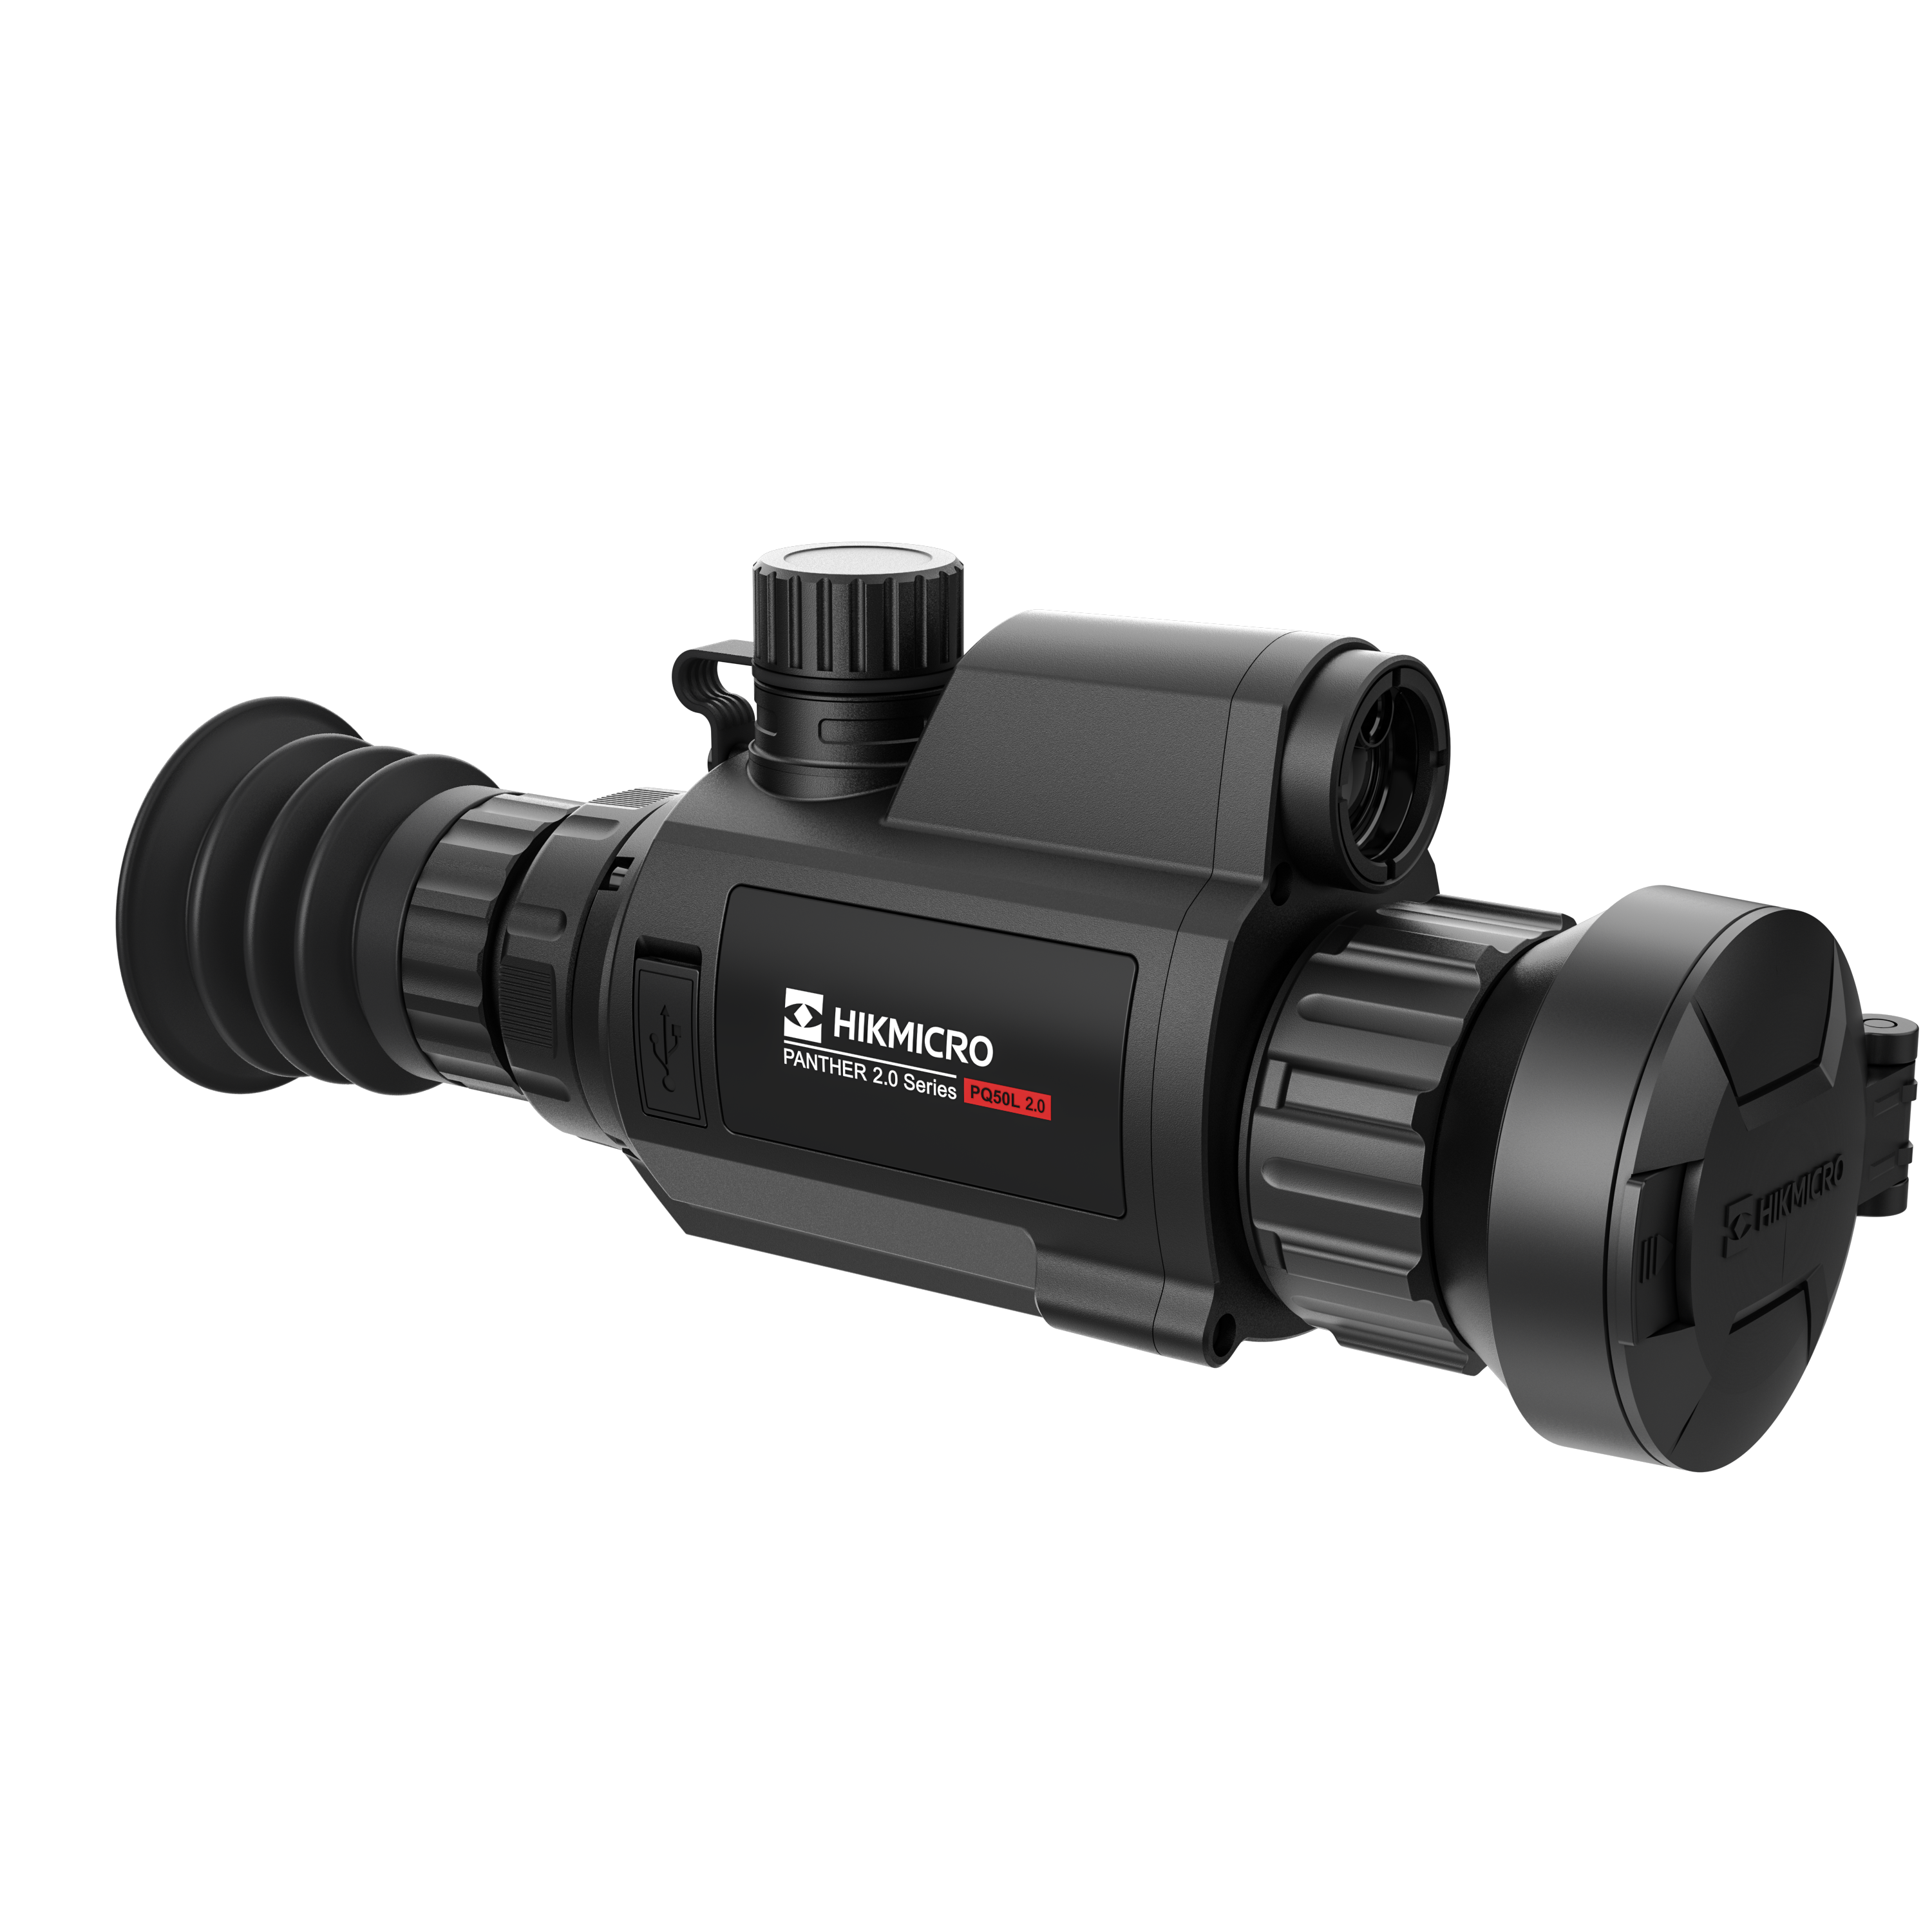 HIKMICRO Panther PQ50L 2.0 Thermal Scope - 50mm